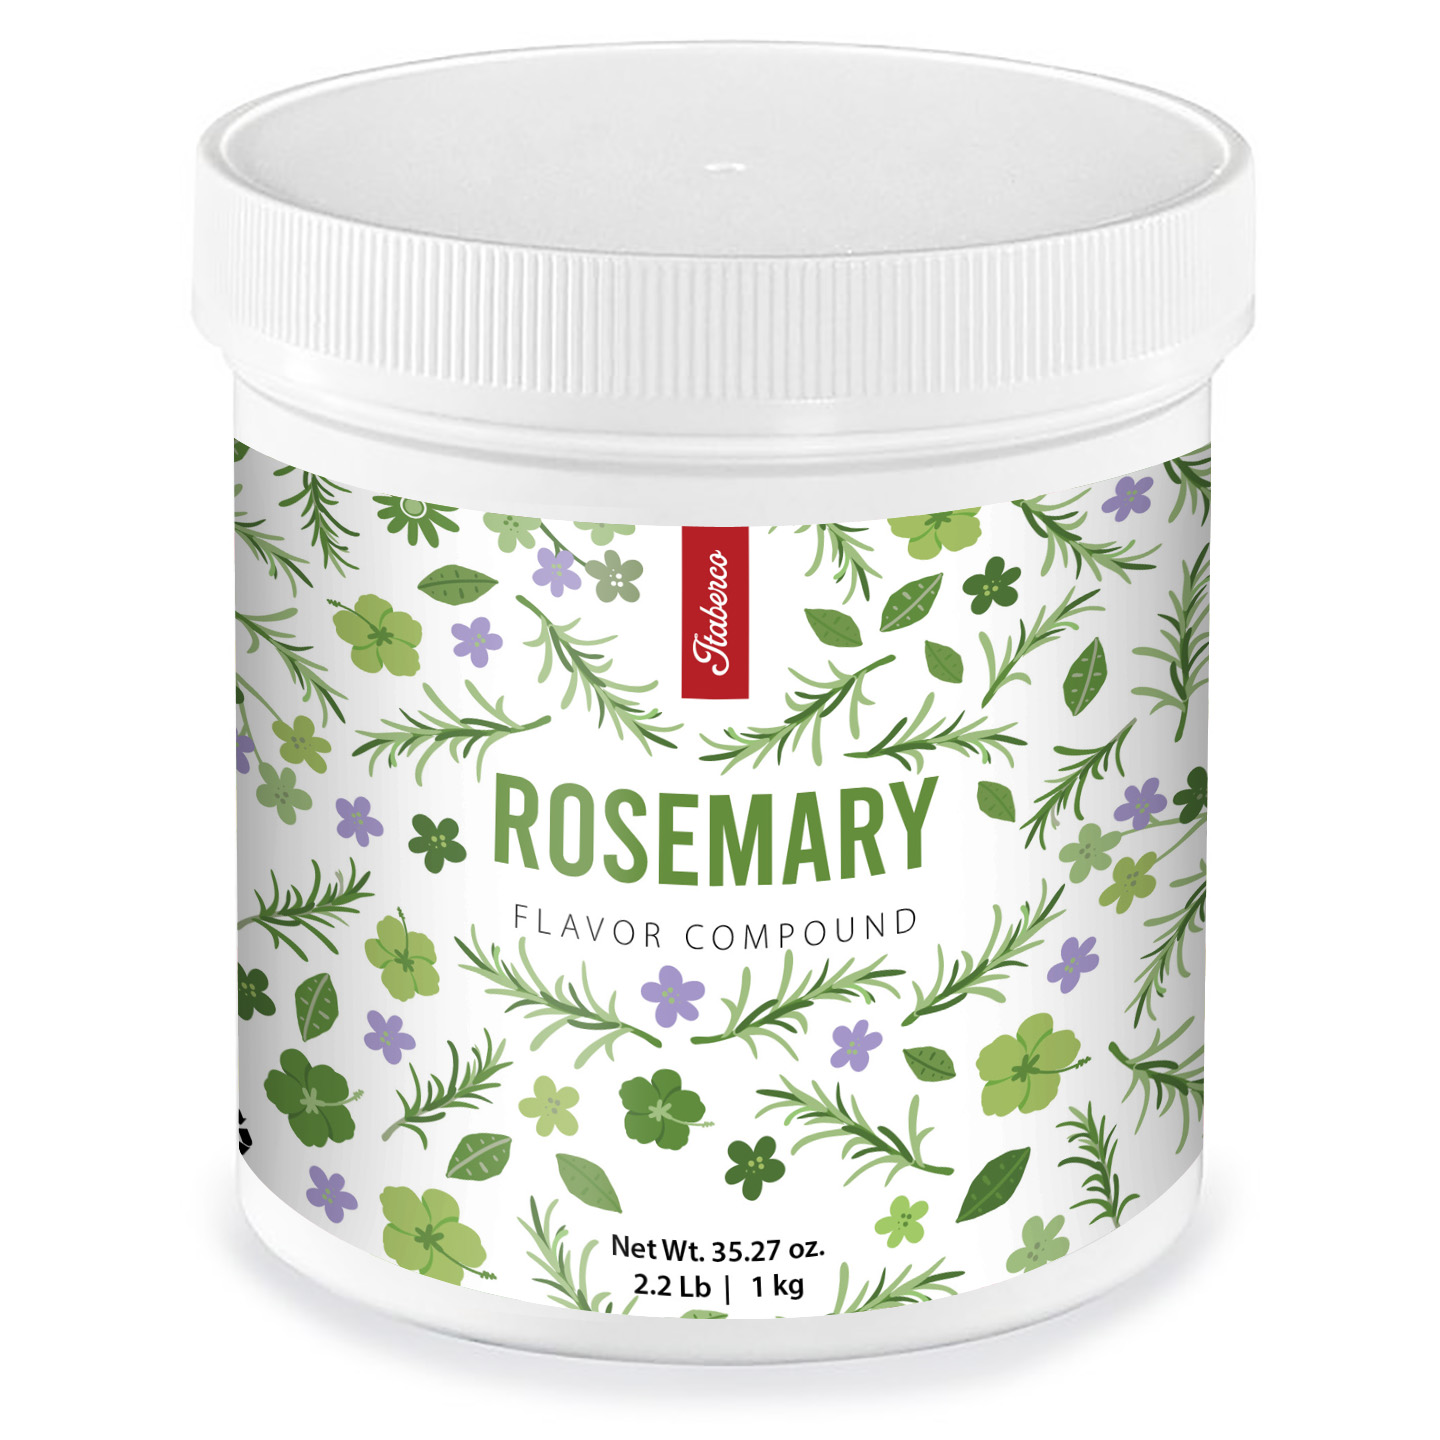 Rosemary Flavor Compound